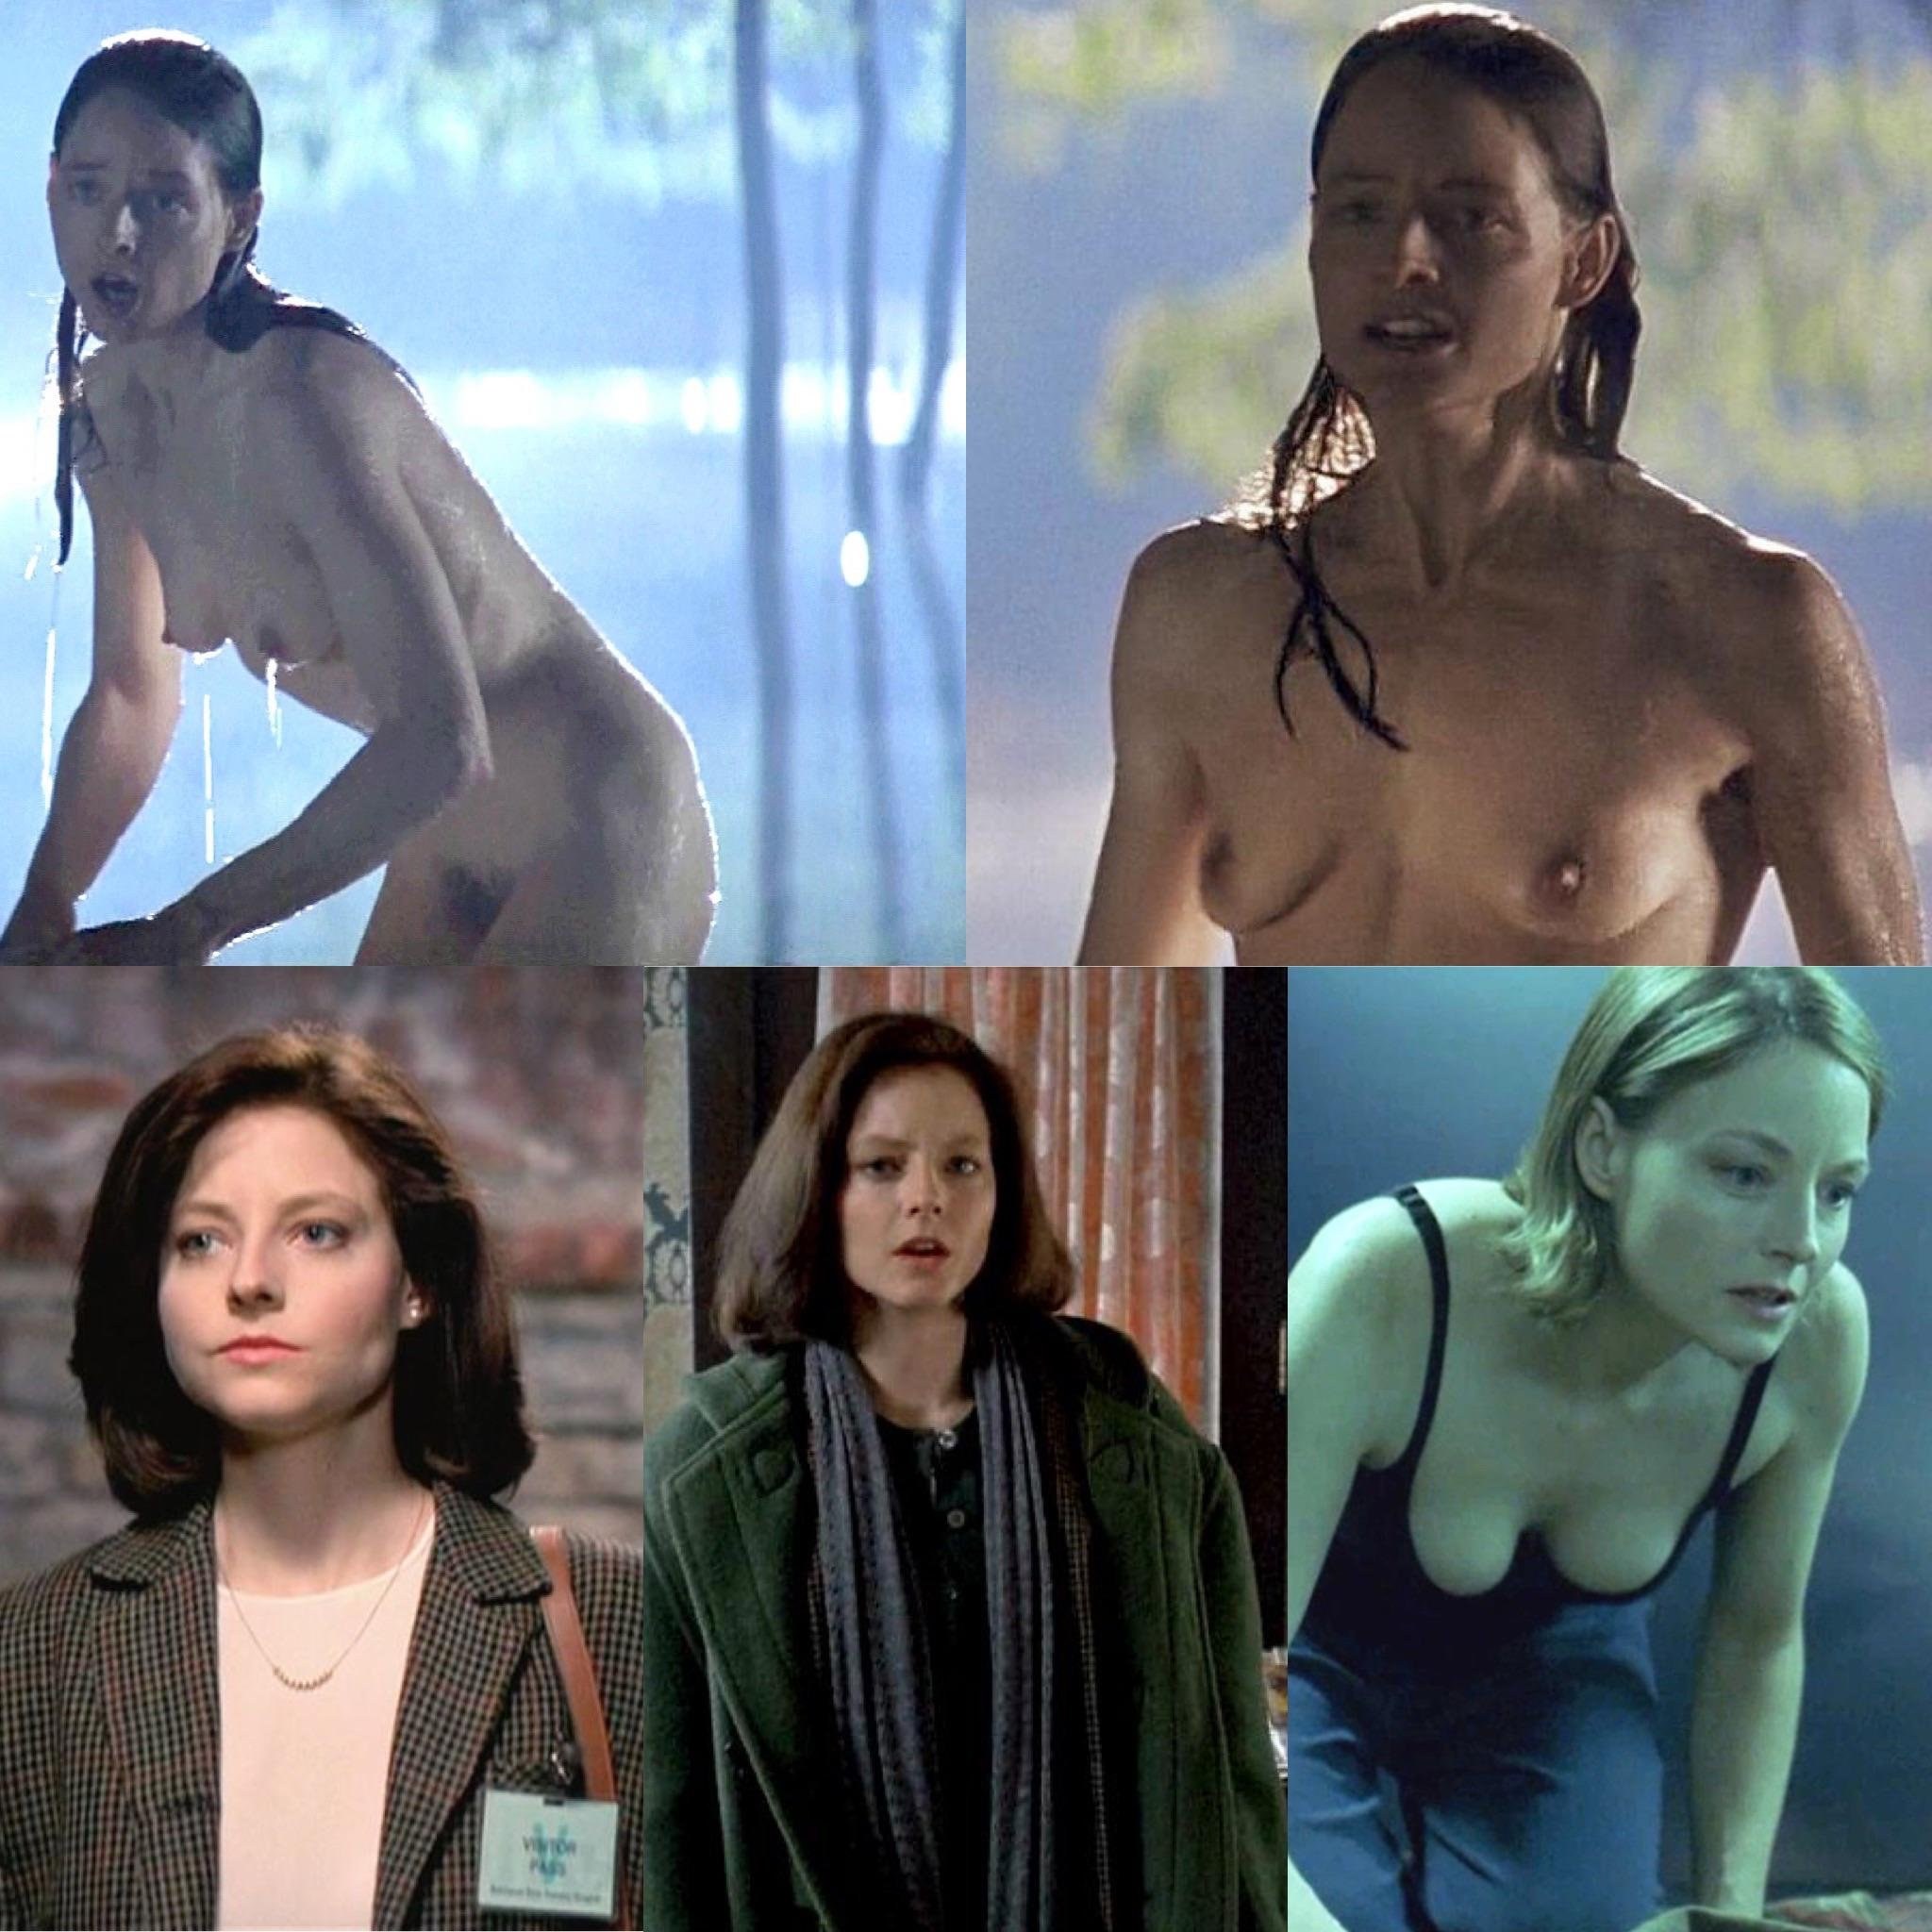 Behold the sexiness of jodie foster in these sensual nude photos